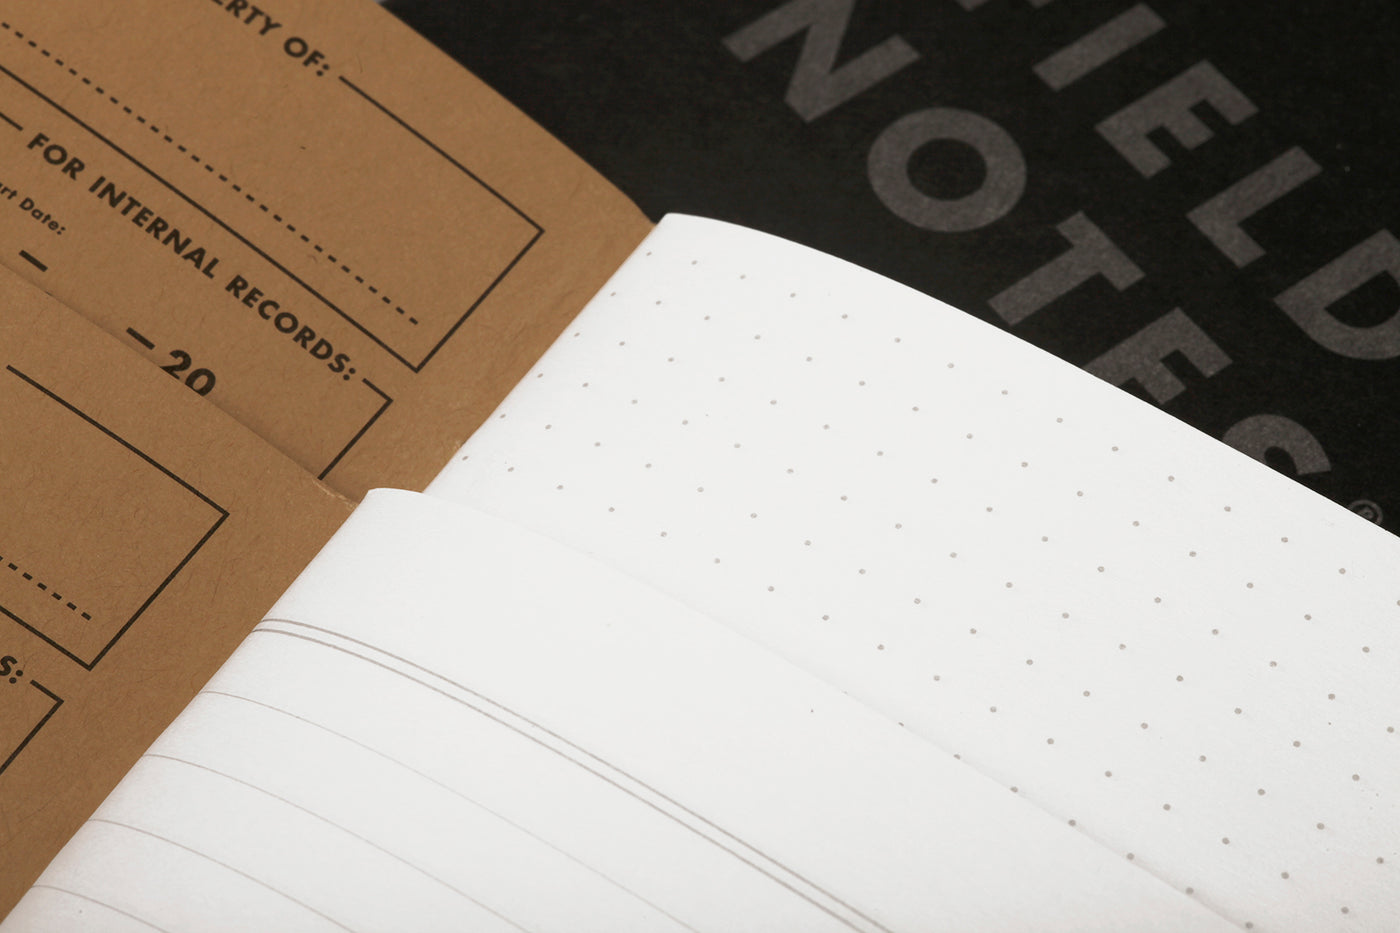 Interior detail on Pitch Black Memo book showing both dot grid and ruled paper options.